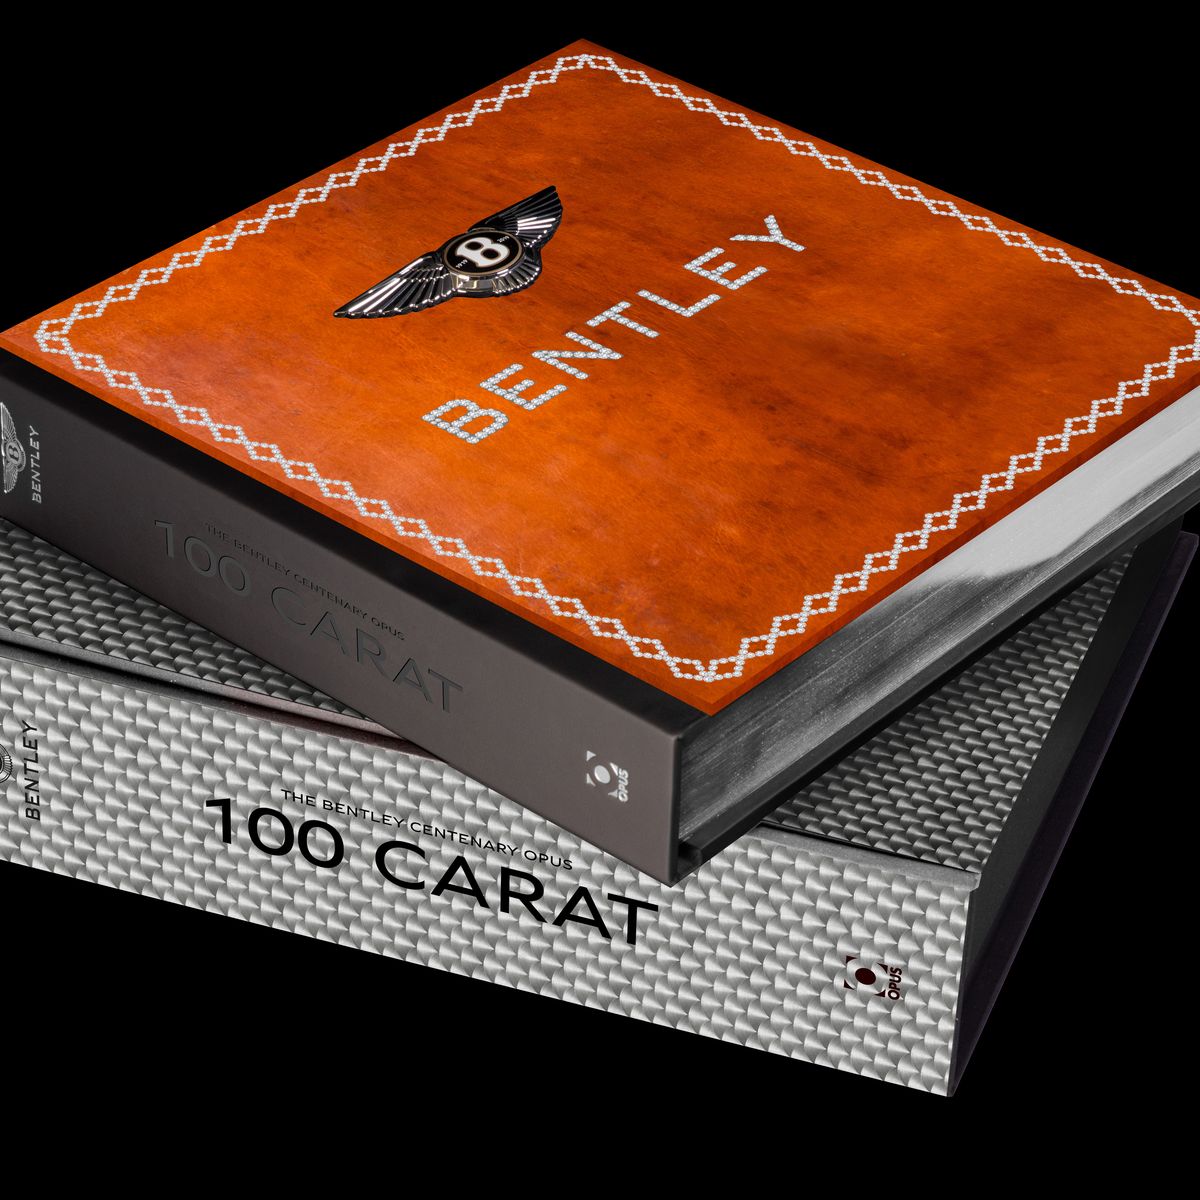 Bentley Created a Coffee-Table Book That Costs Over $250,000